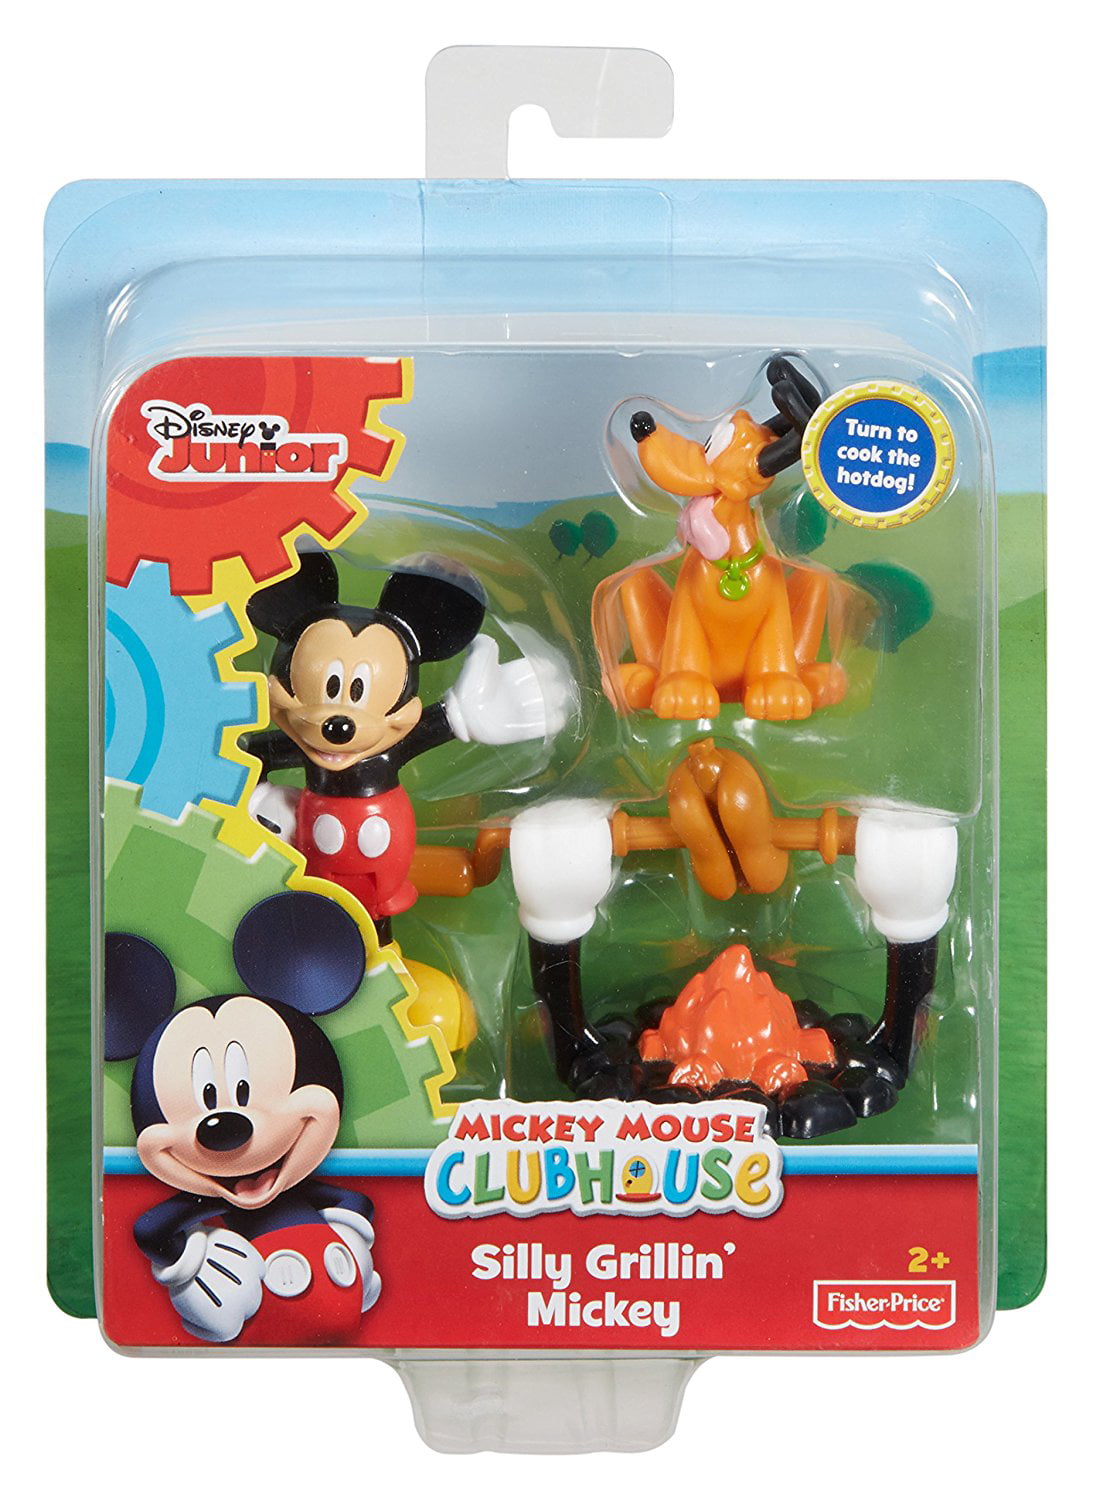 18 months Disney Mickey Mouse Learning Pet Carrier Play set with Pluto 